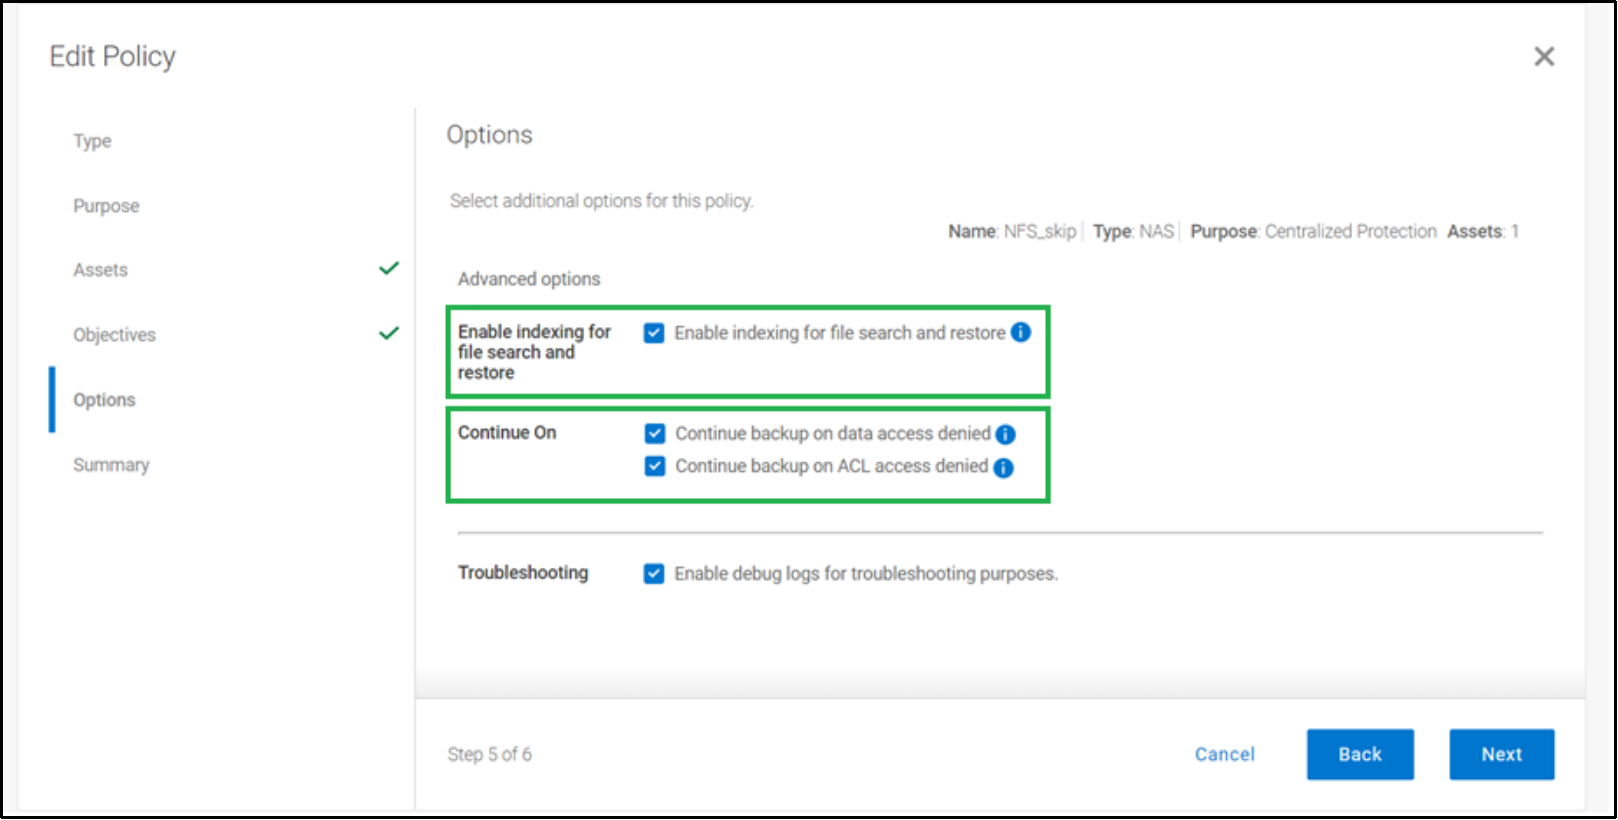 Image shows Edit policy options to enable Indexing for file search and restore as well as continue backup options on reaching certain error conditions.